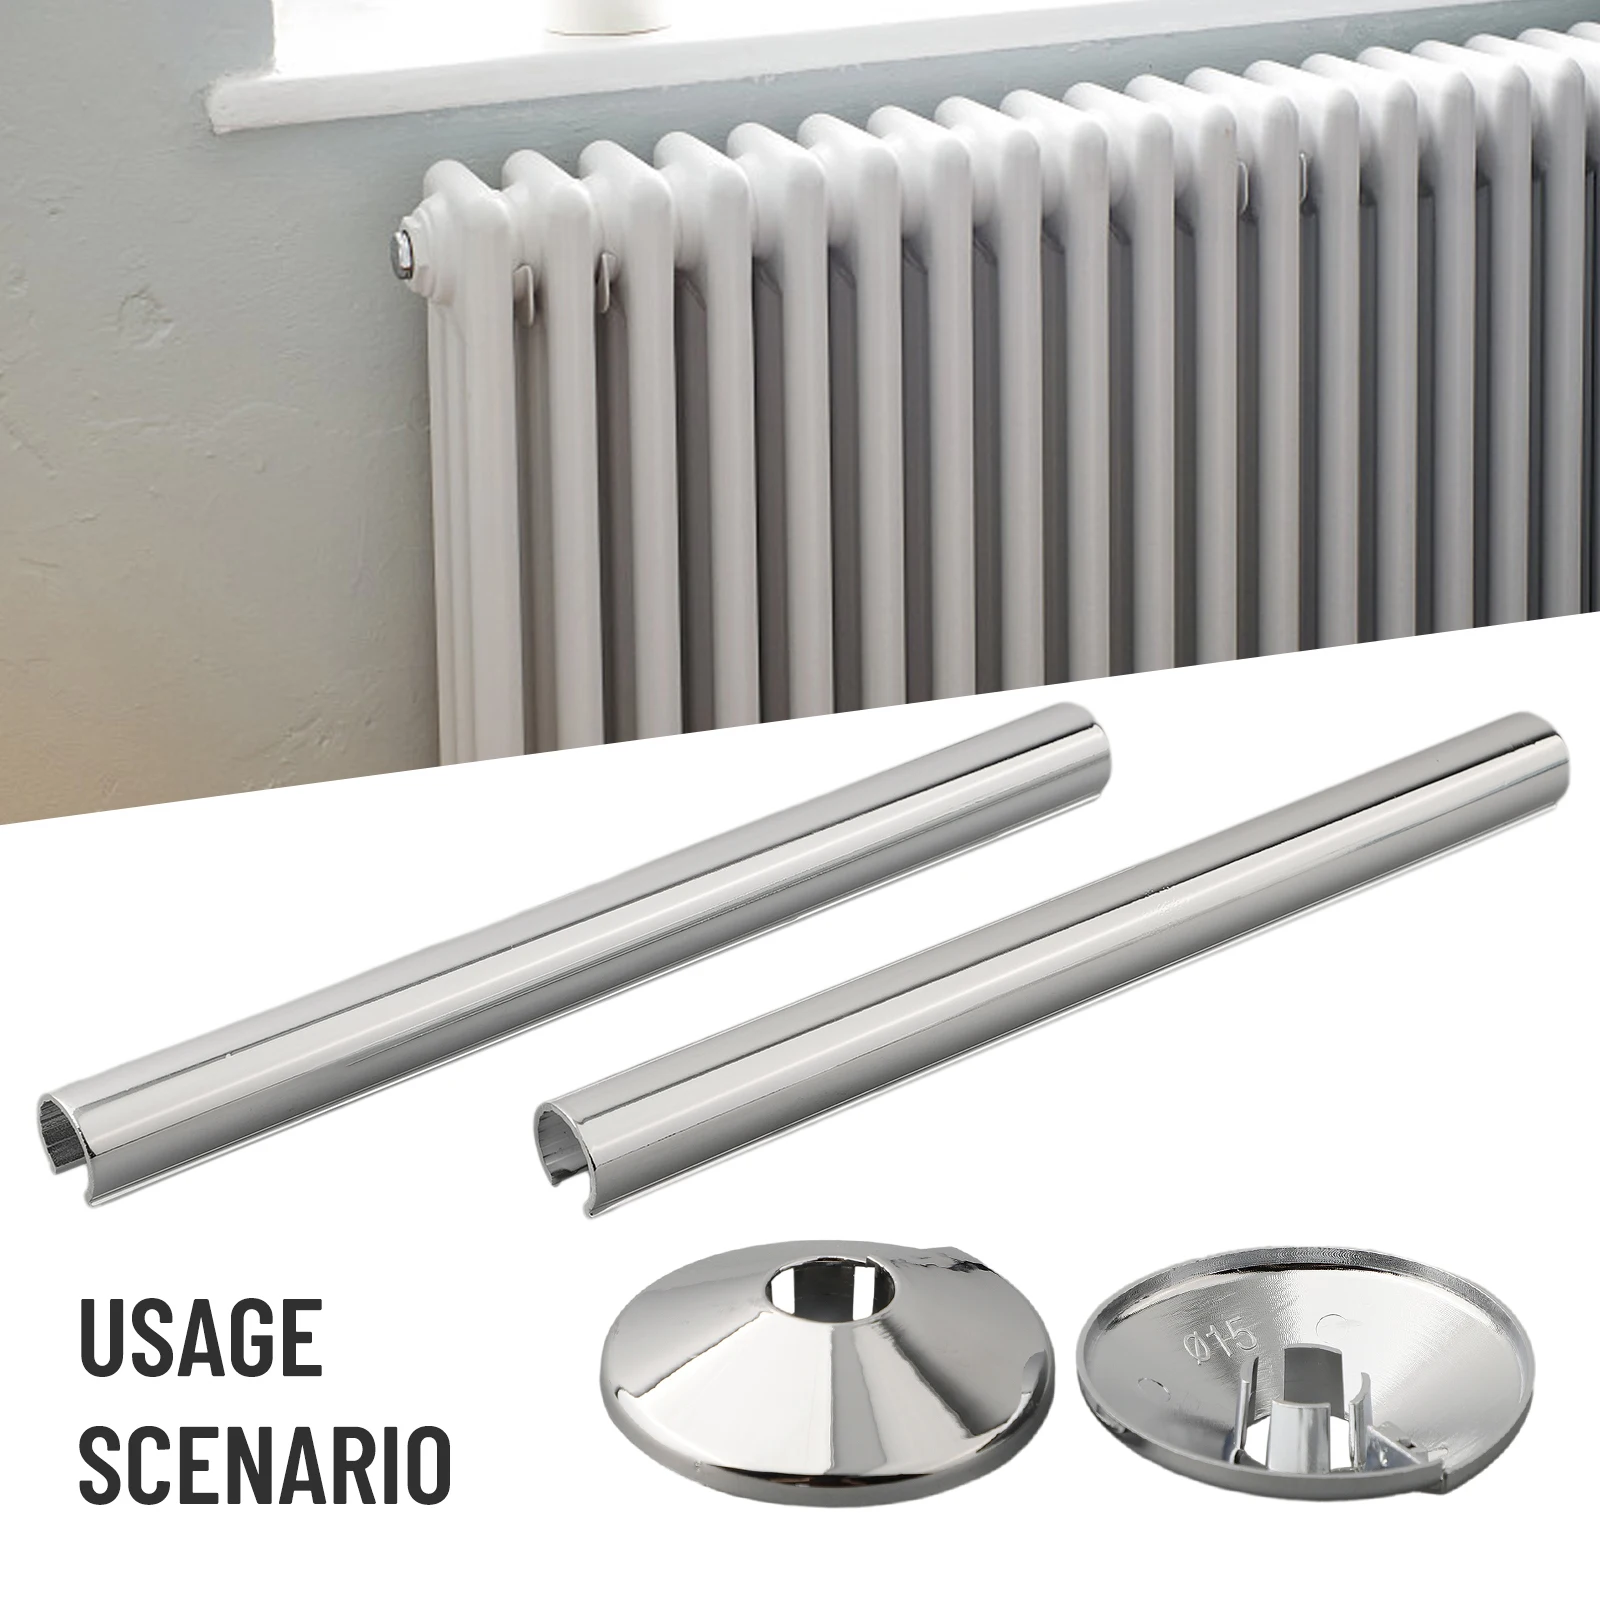 

Upgrade Your Living Space with 2 pk Pipes Radiator Pipe Covers Sleeve 15mm Collars in Chrome Easy Installation